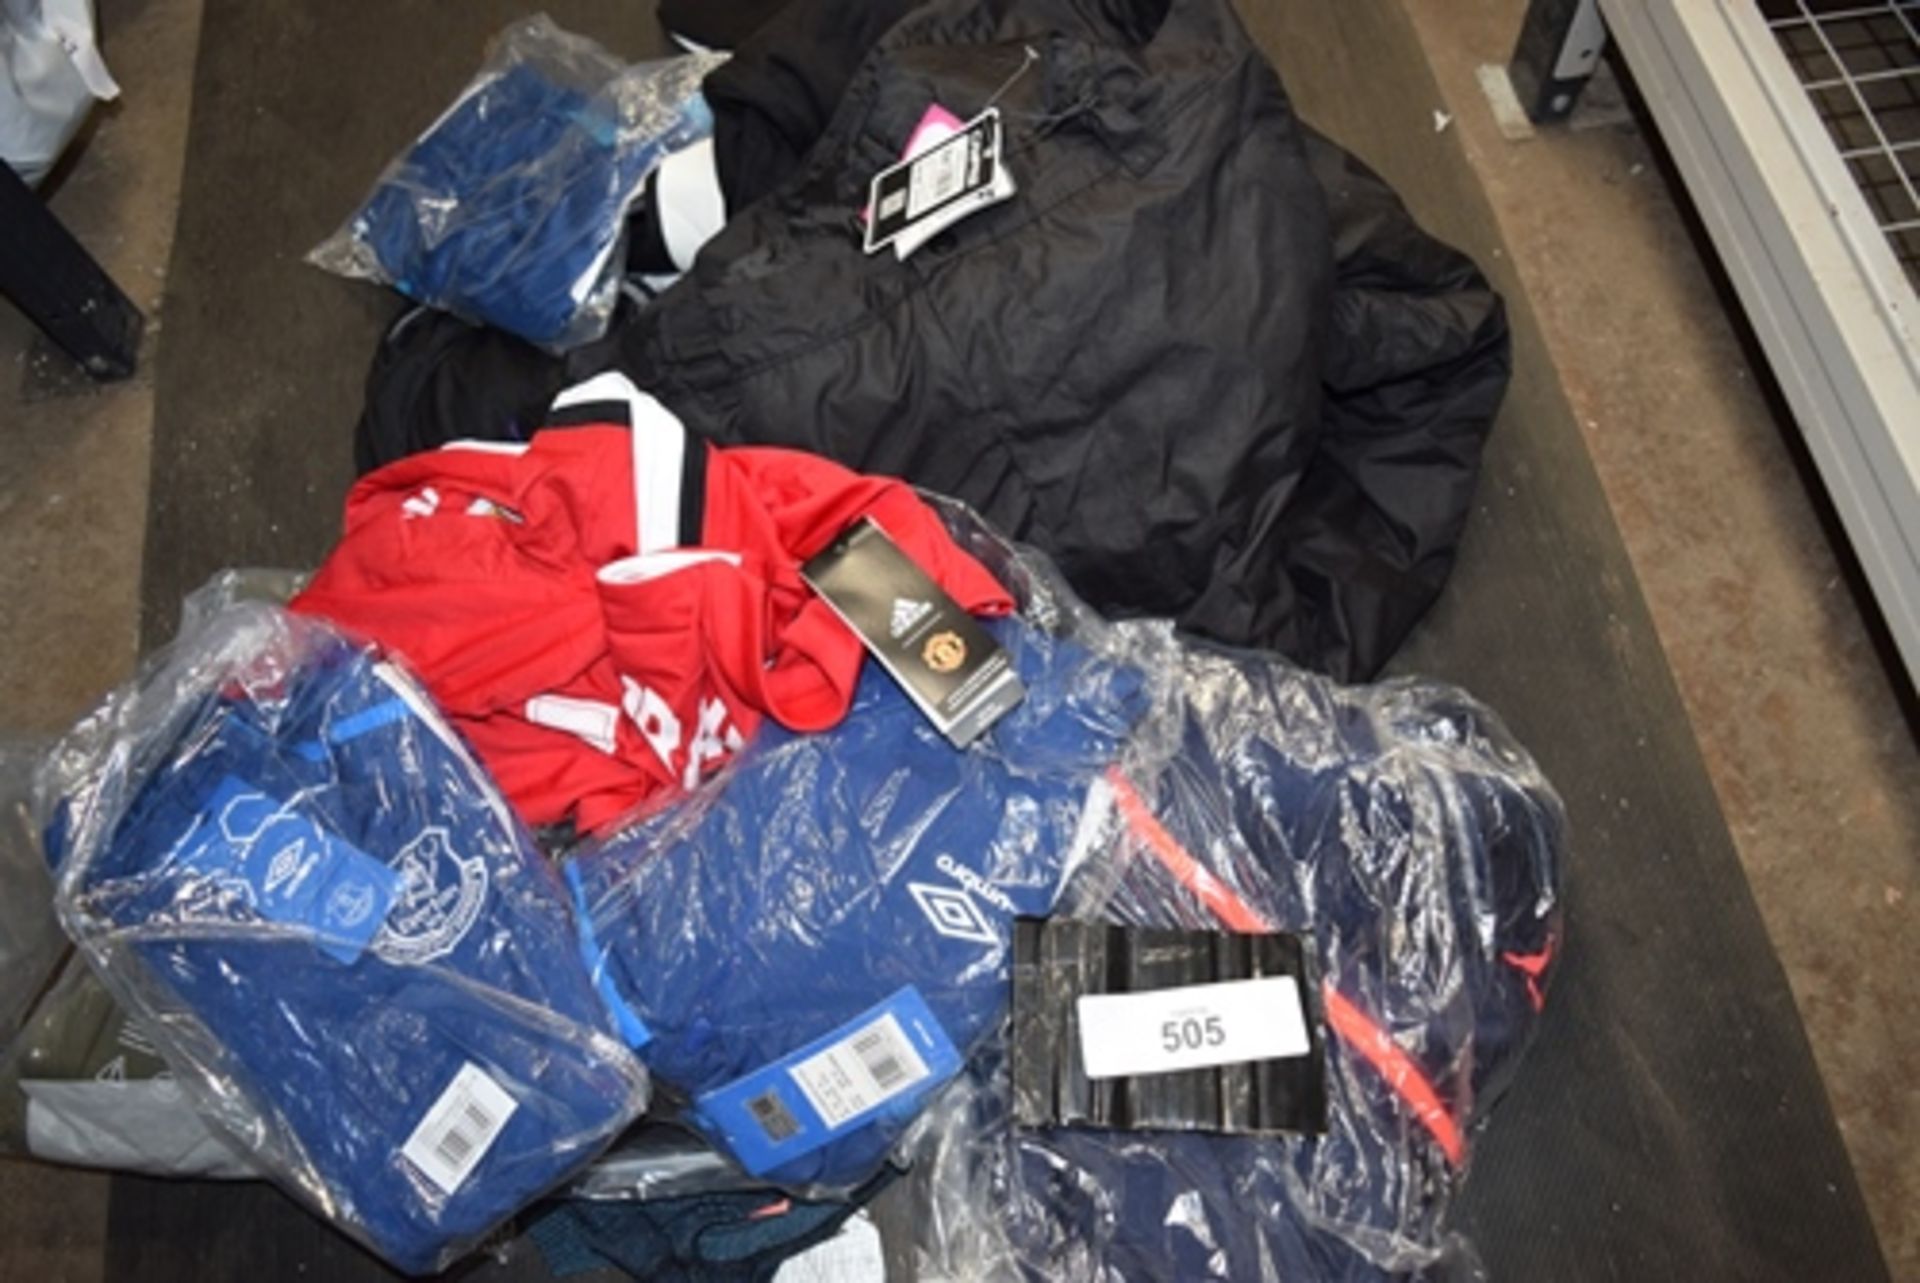 A quantity of mixed sportswear including Reebok, Kappa, and official football shirts. The details